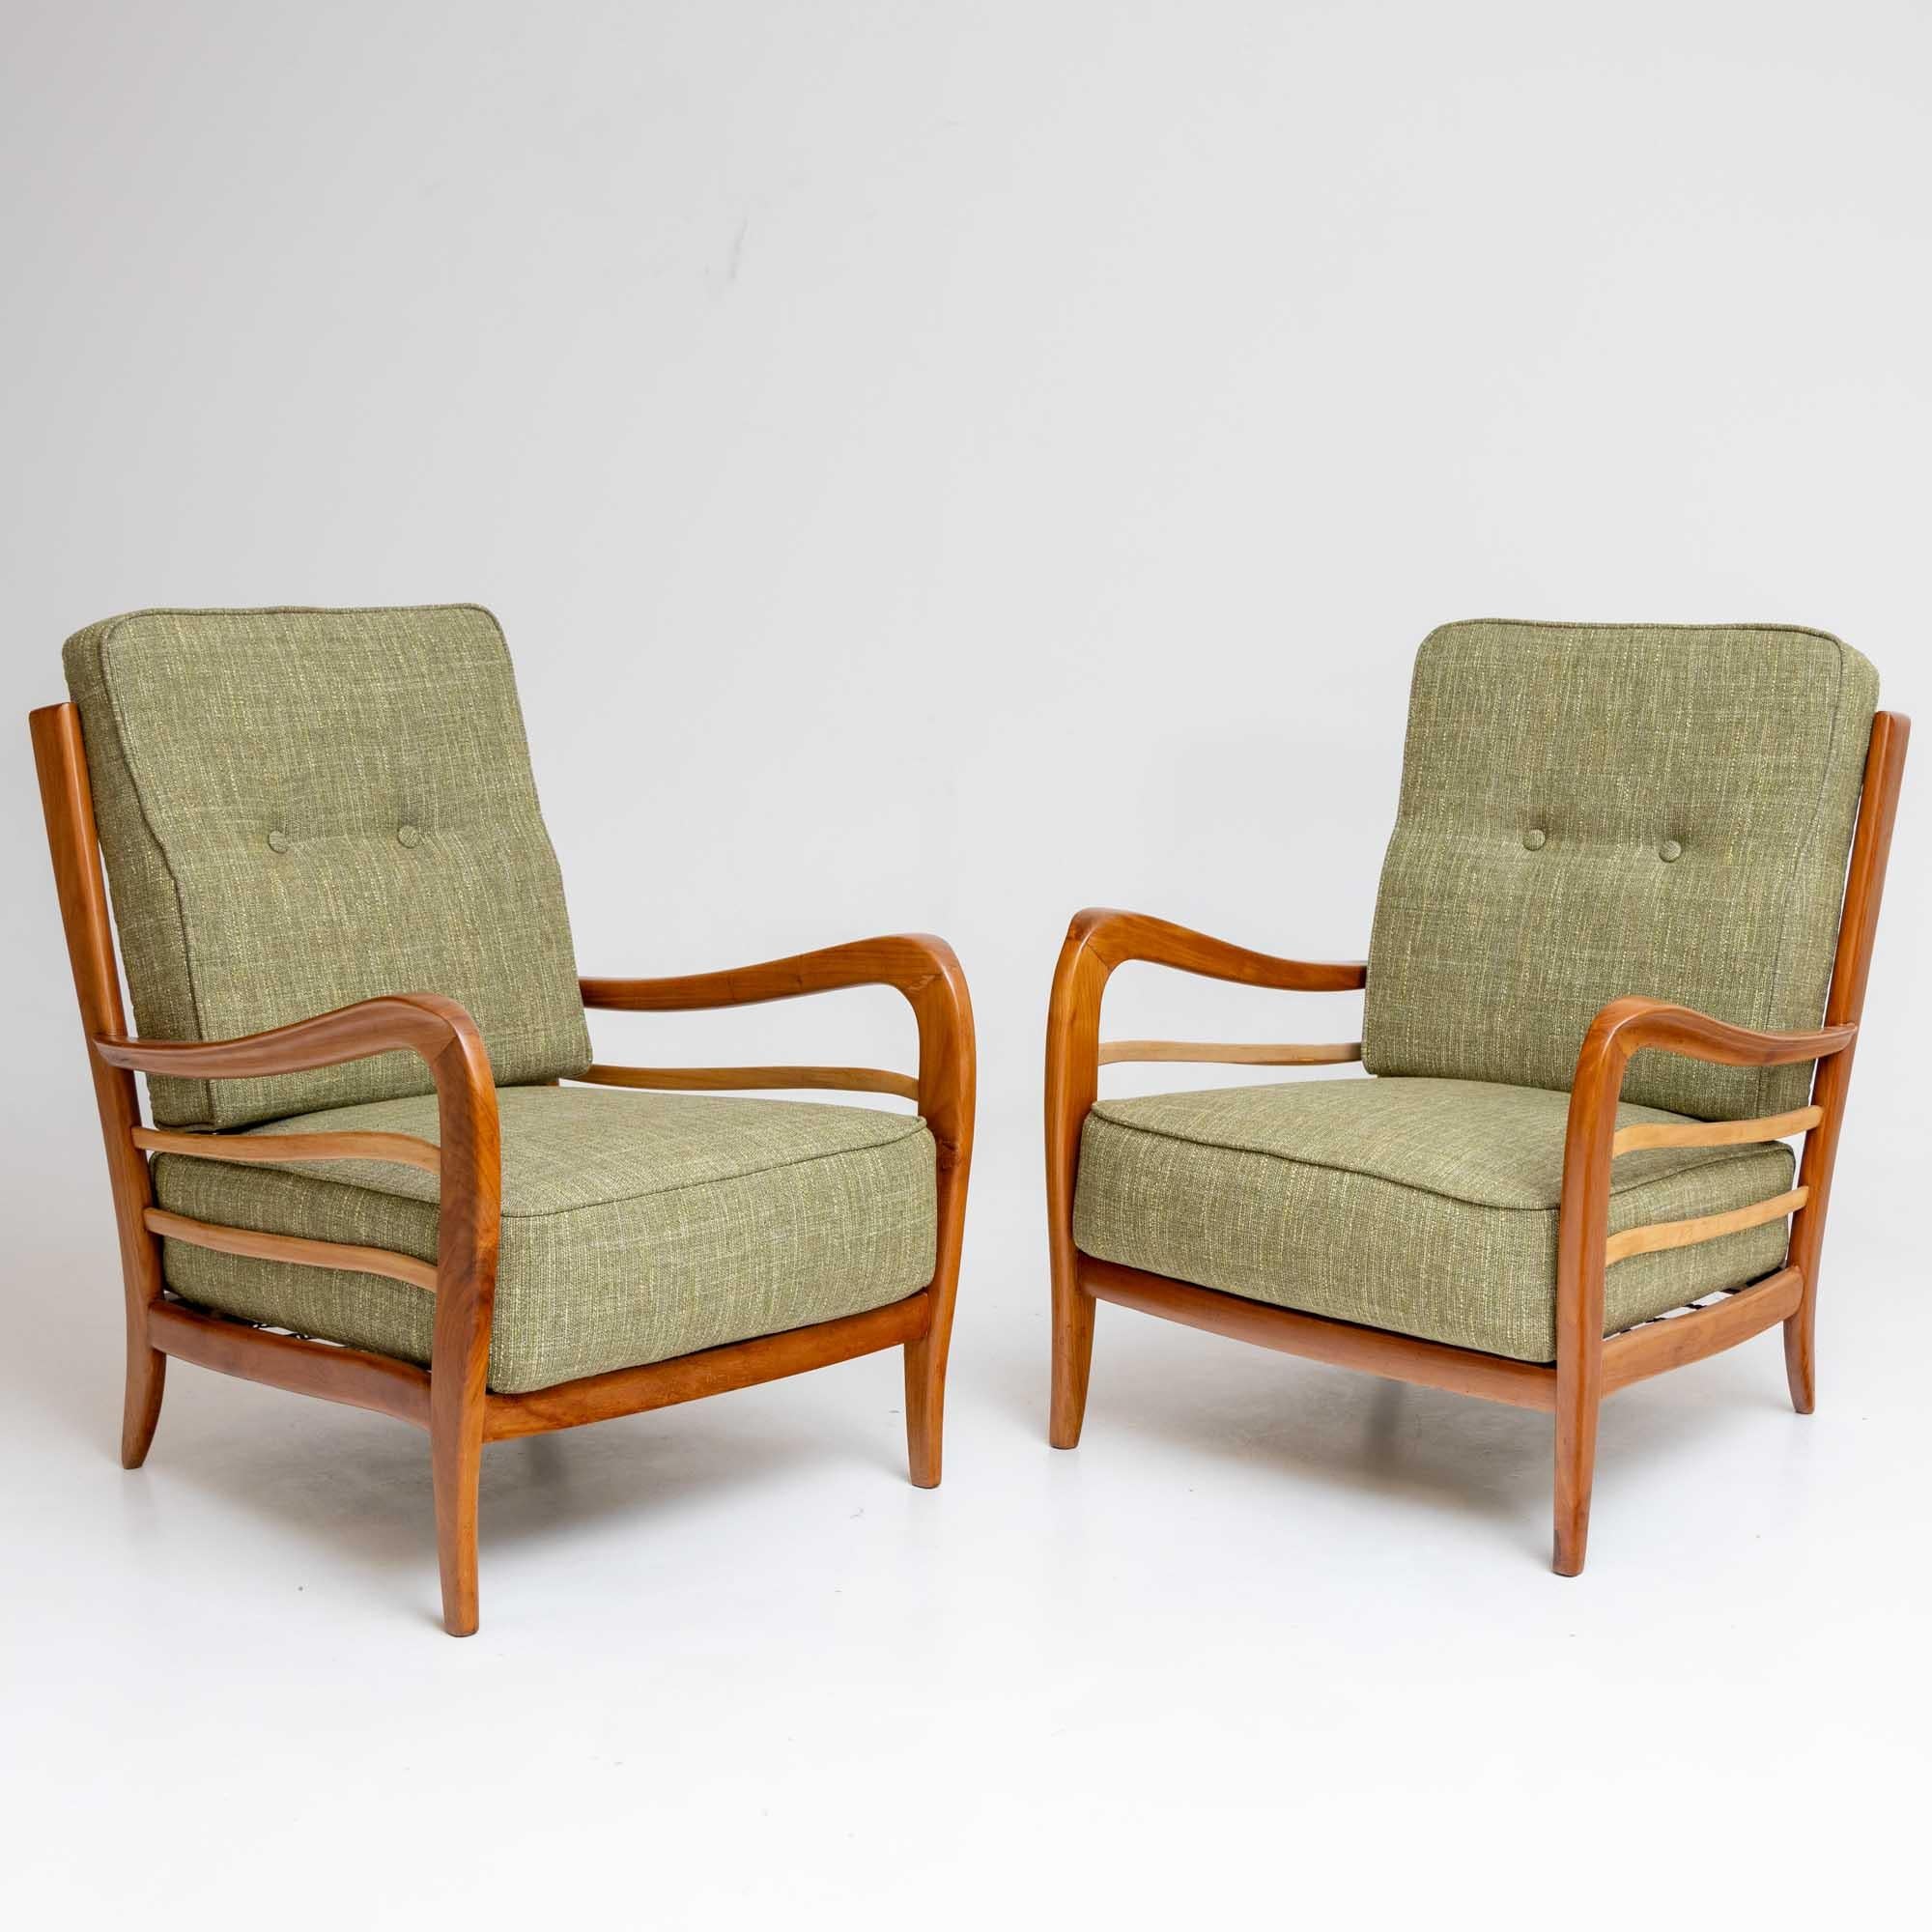 Pair of light green upholstered lounge chairs, attributed to the Italian designer Paolo Buffa (Italy, 1903-1970). The elegant curved frames made of solid cherry have been polished and the seat cushions are newly upholstered. Like the sides, the back